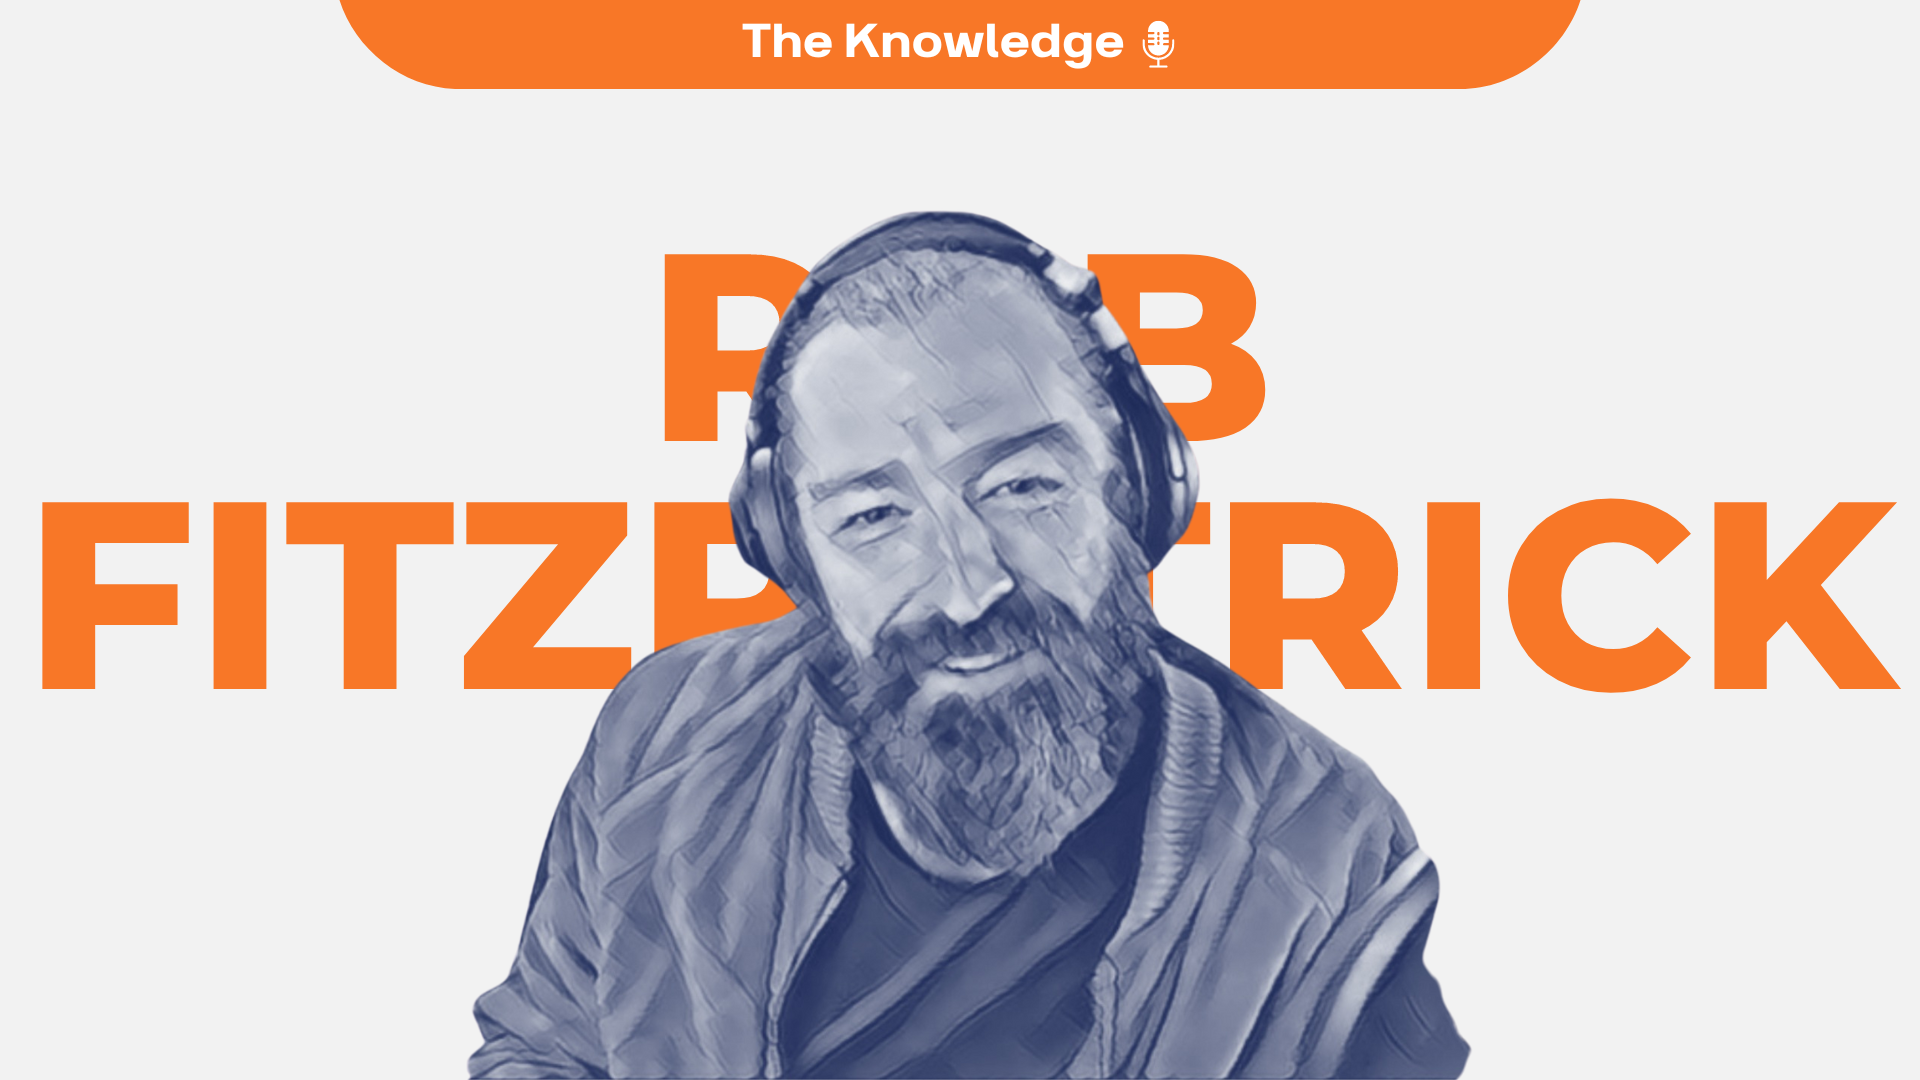 🎙Make Things that Matter with Rob Fitzpatrick